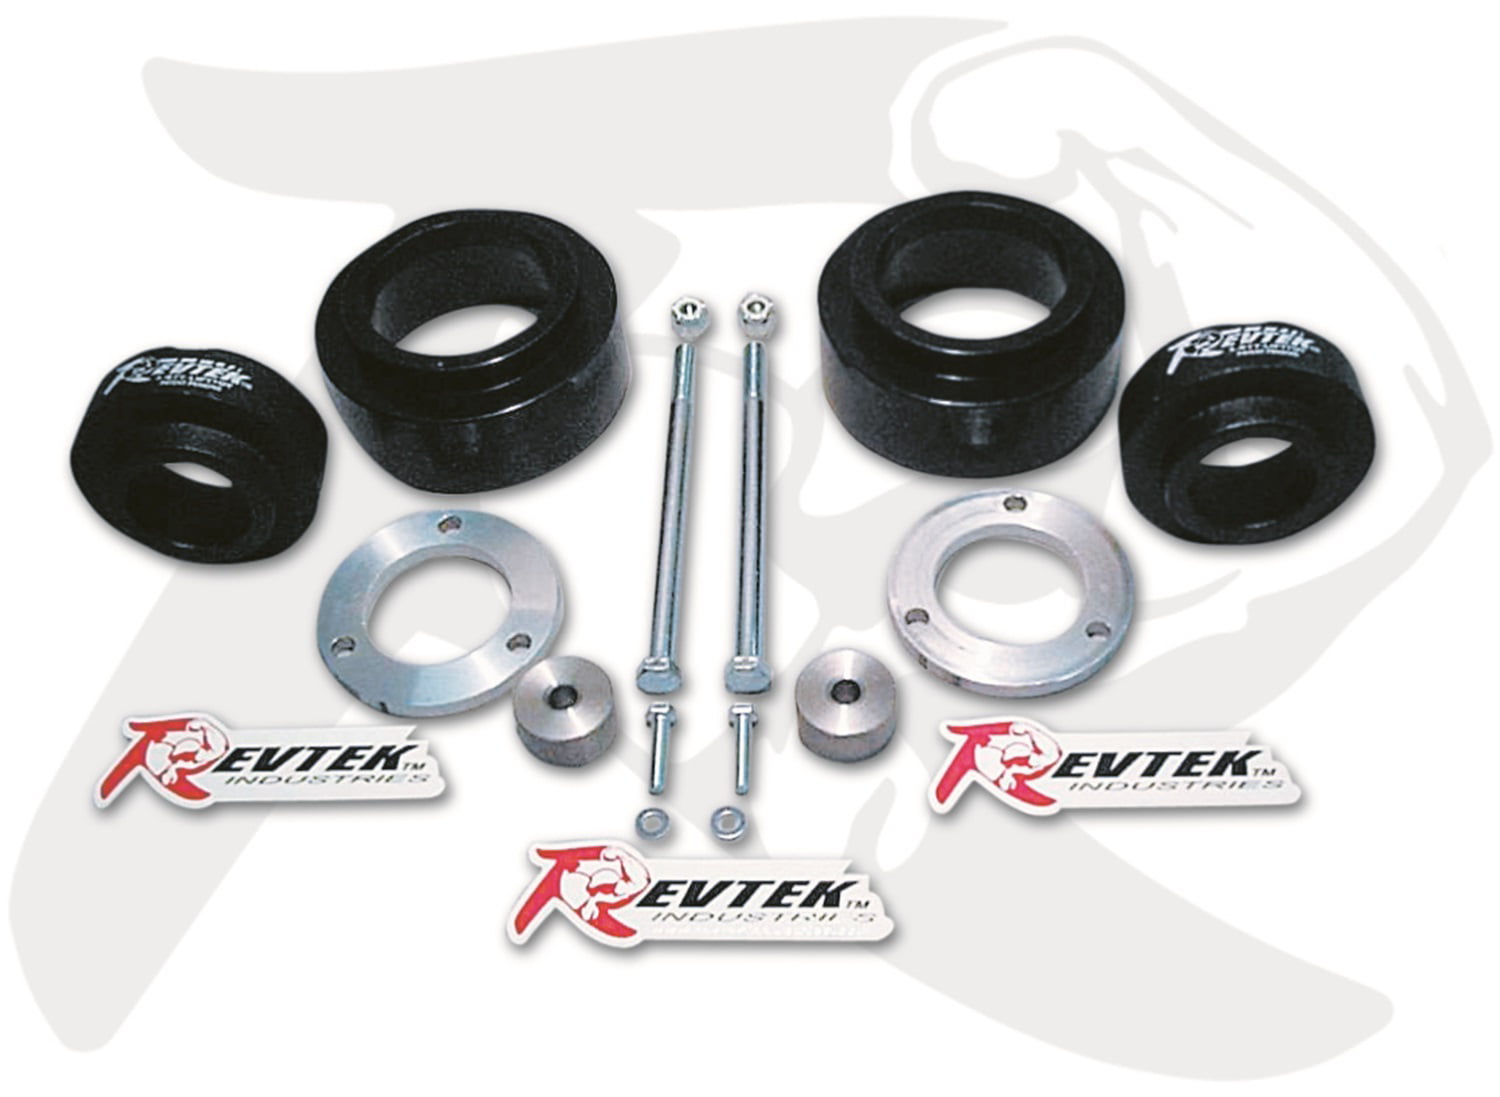 4 New Pc Suspension Kit for Toyota 4Runner 96-02 Outer Tie Rod Ends Ball Joints